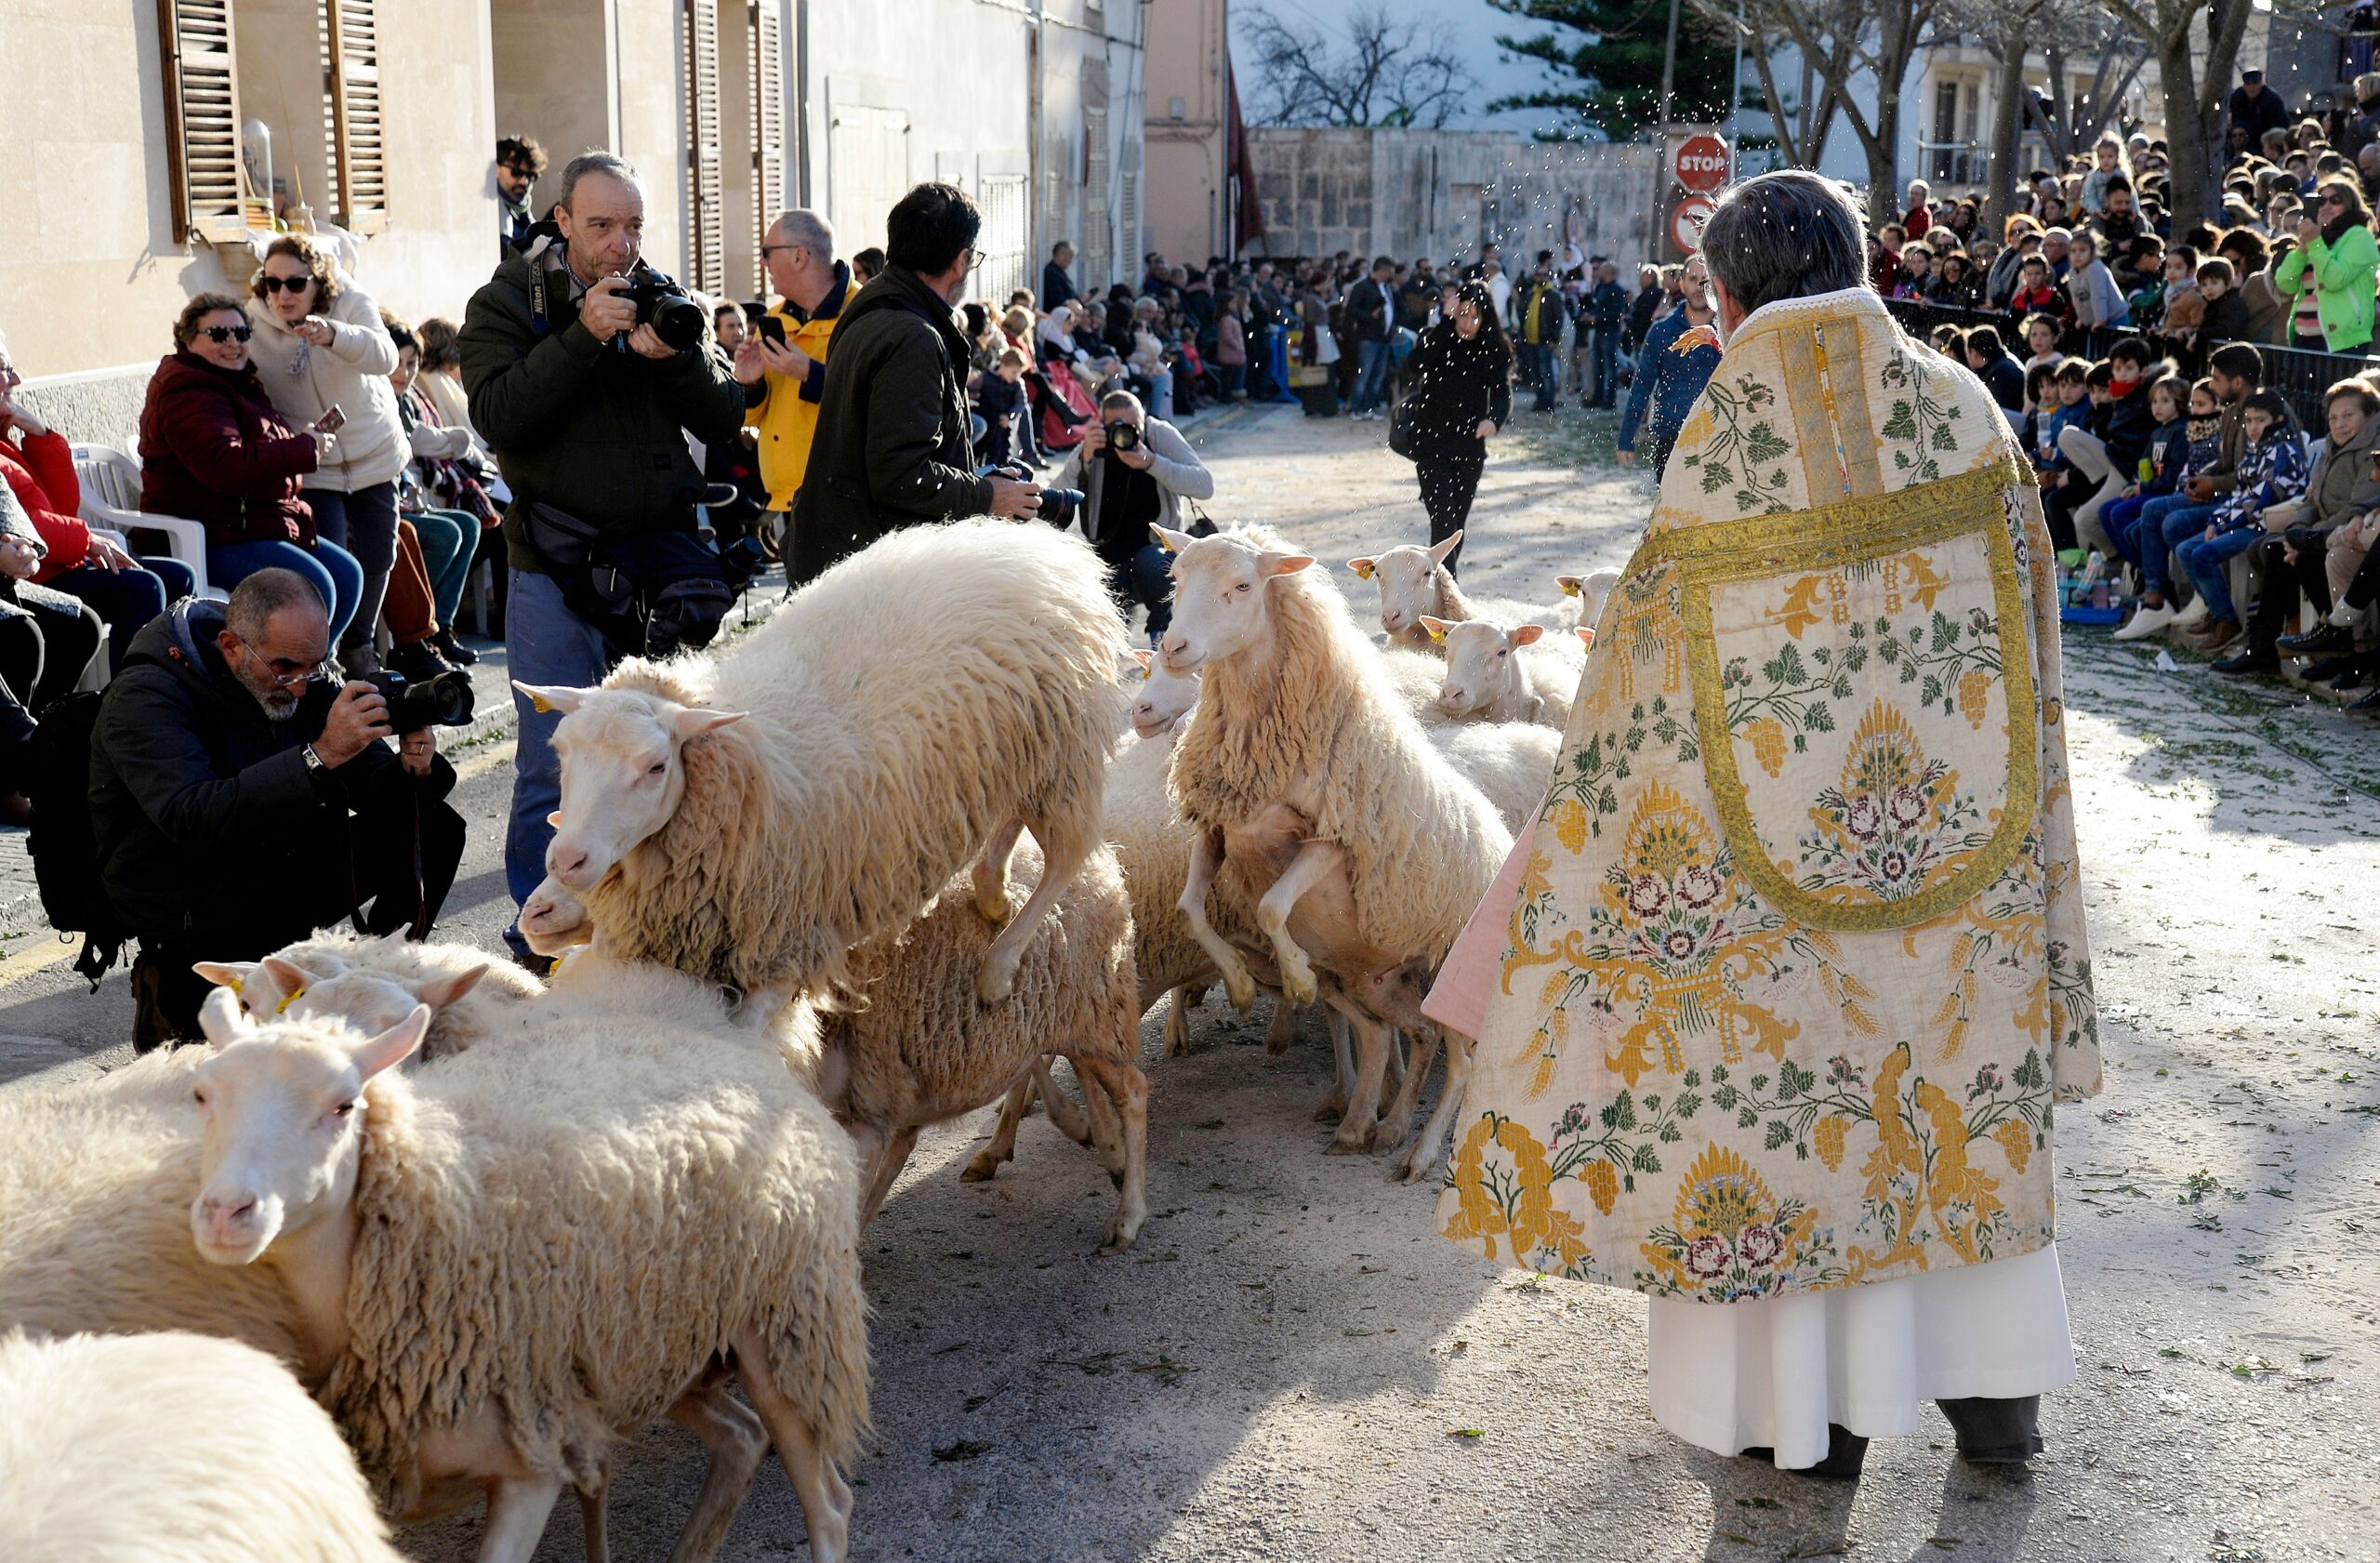 The animal consecration in Sant Antoni is a spectacle for young and old alike